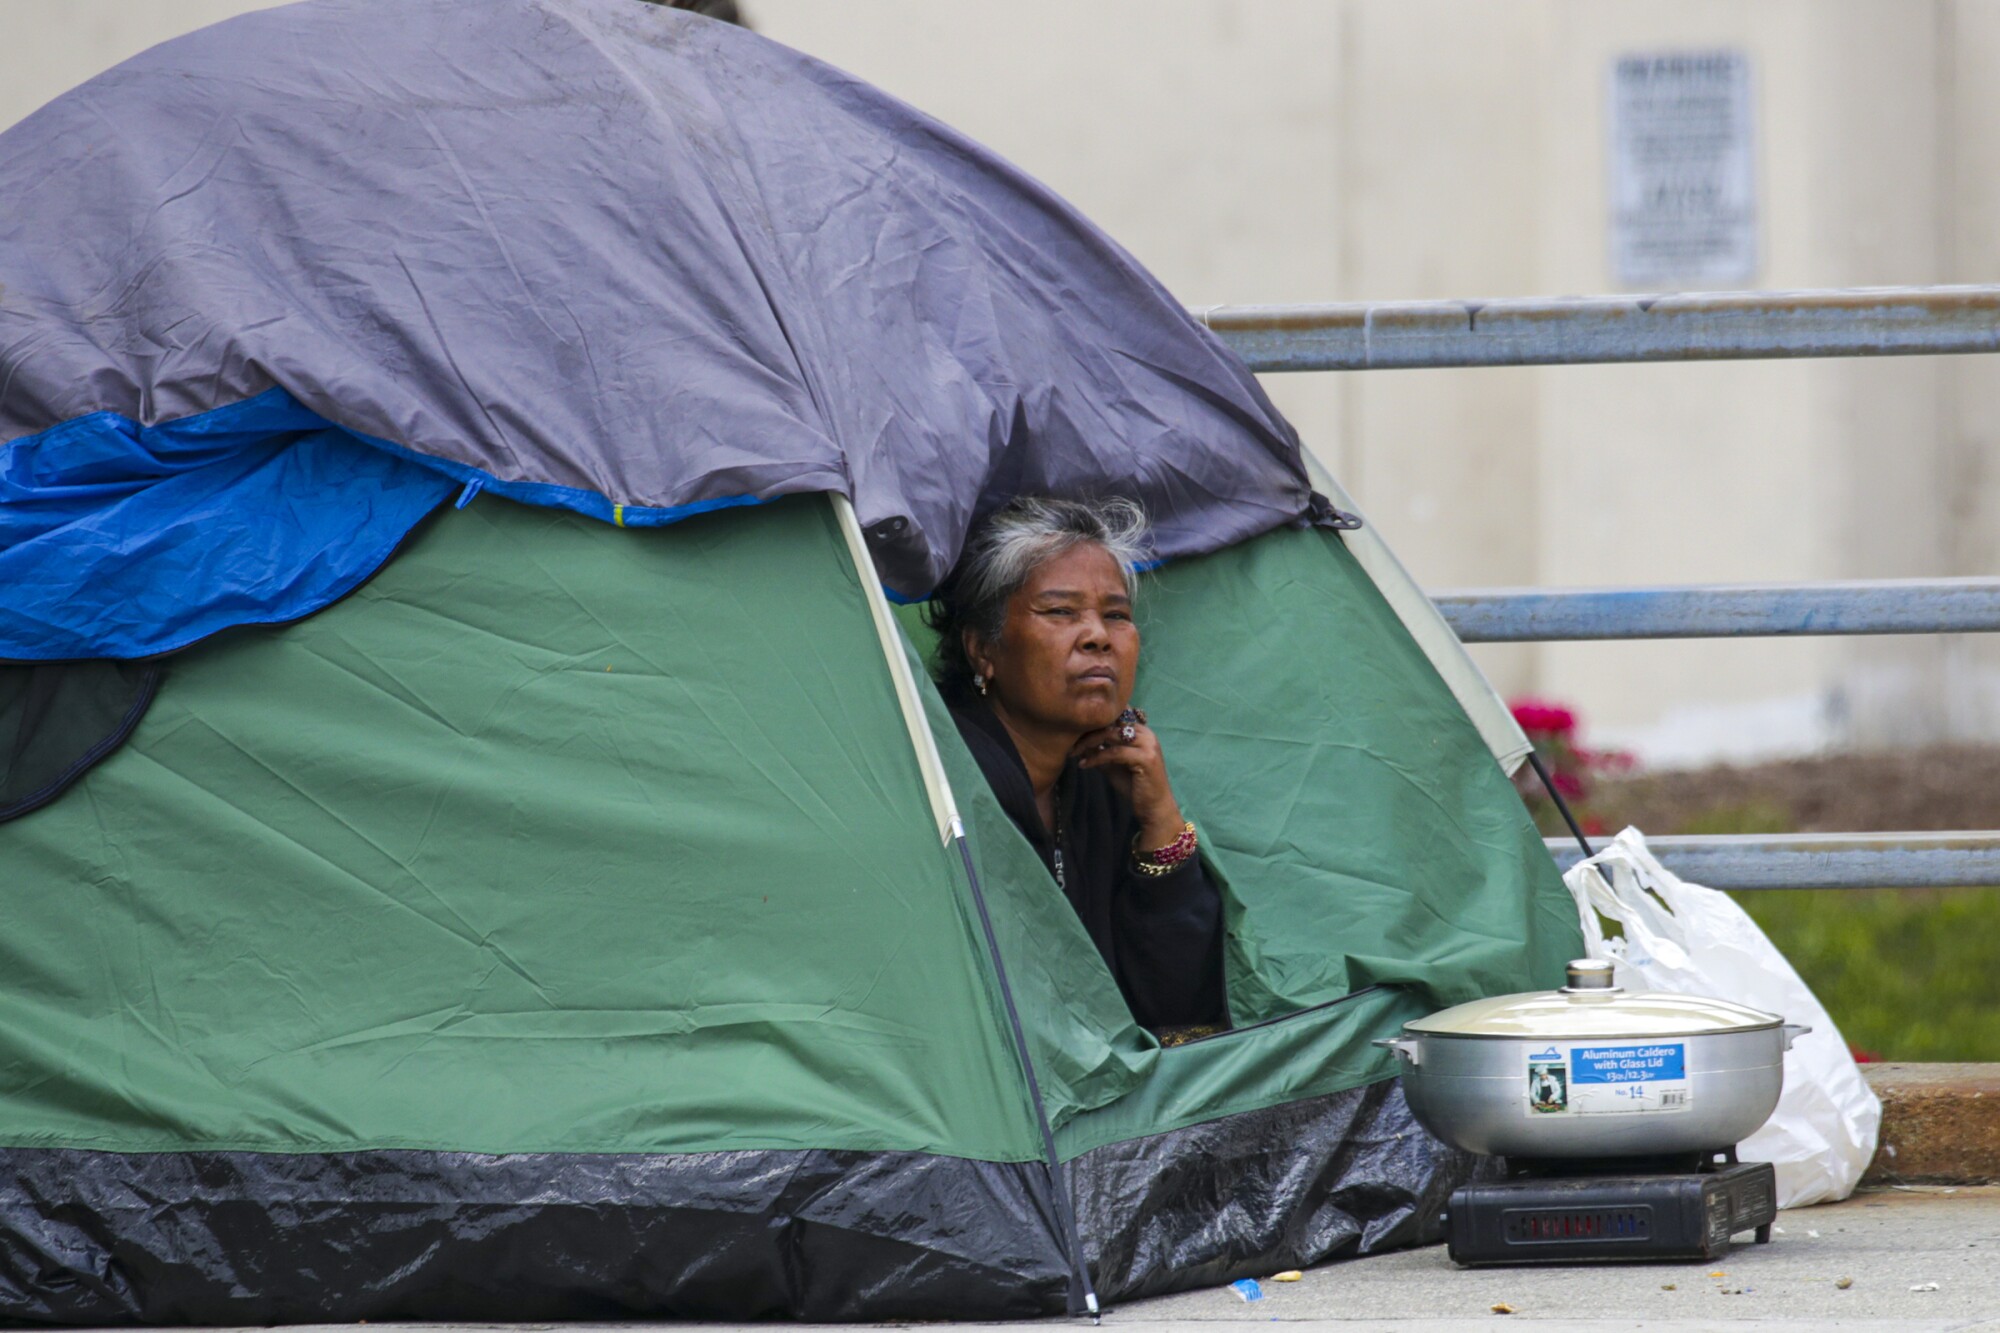 A homeless person peers out of her tent on Aliso Street in downtown Los Angeles on Friday.